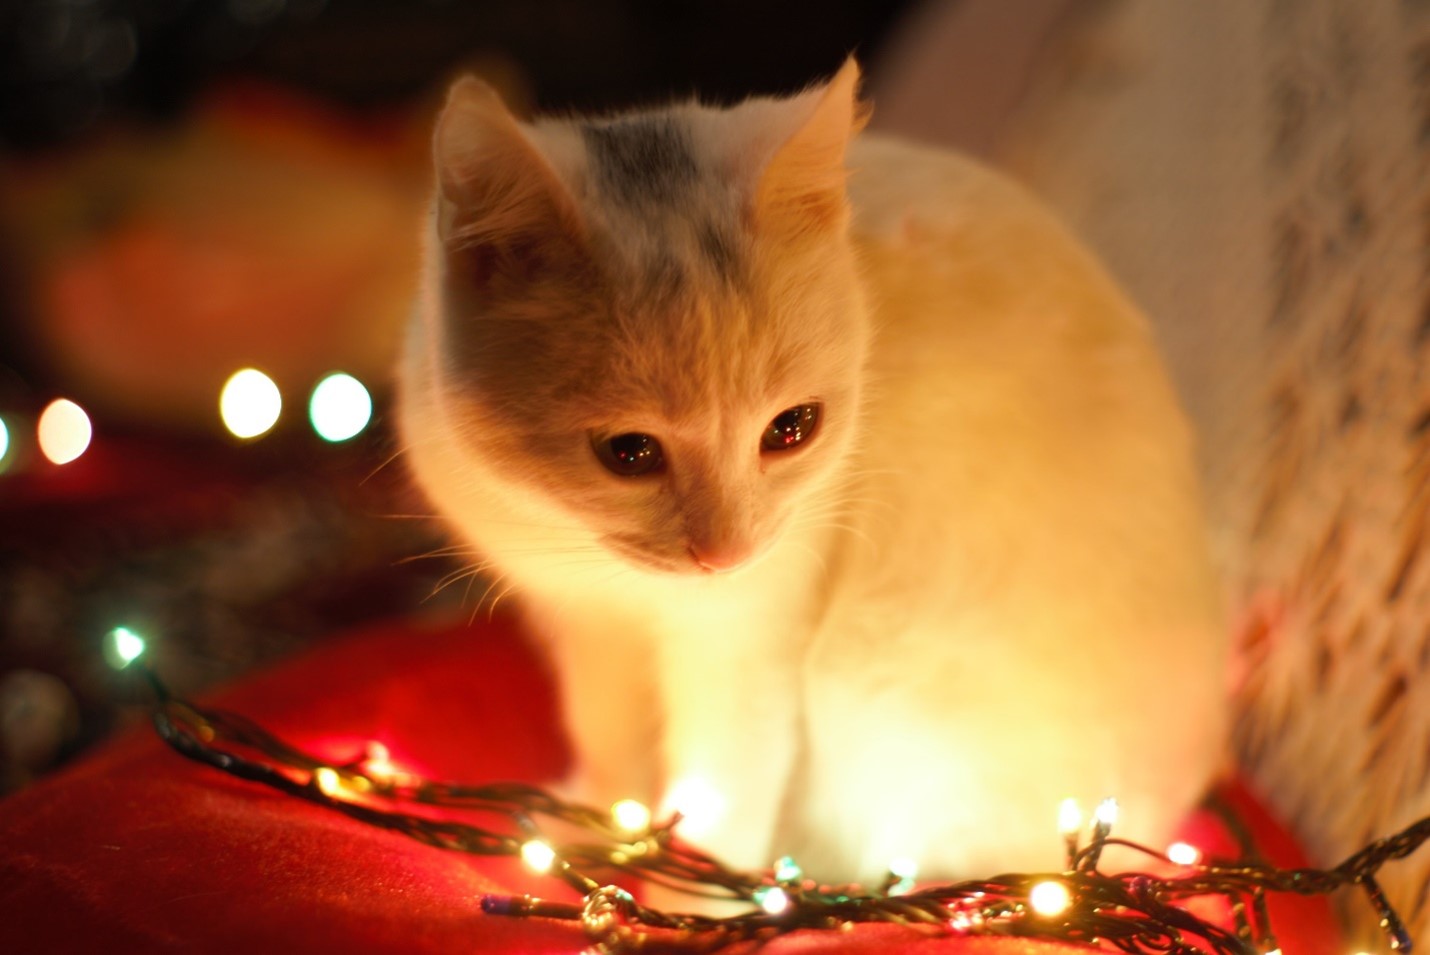 The holiday season can be a fun and exciting time for cats, but it's important to take some extra steps to make sure they remain safe and happy. Here are some tips on how to do just that!